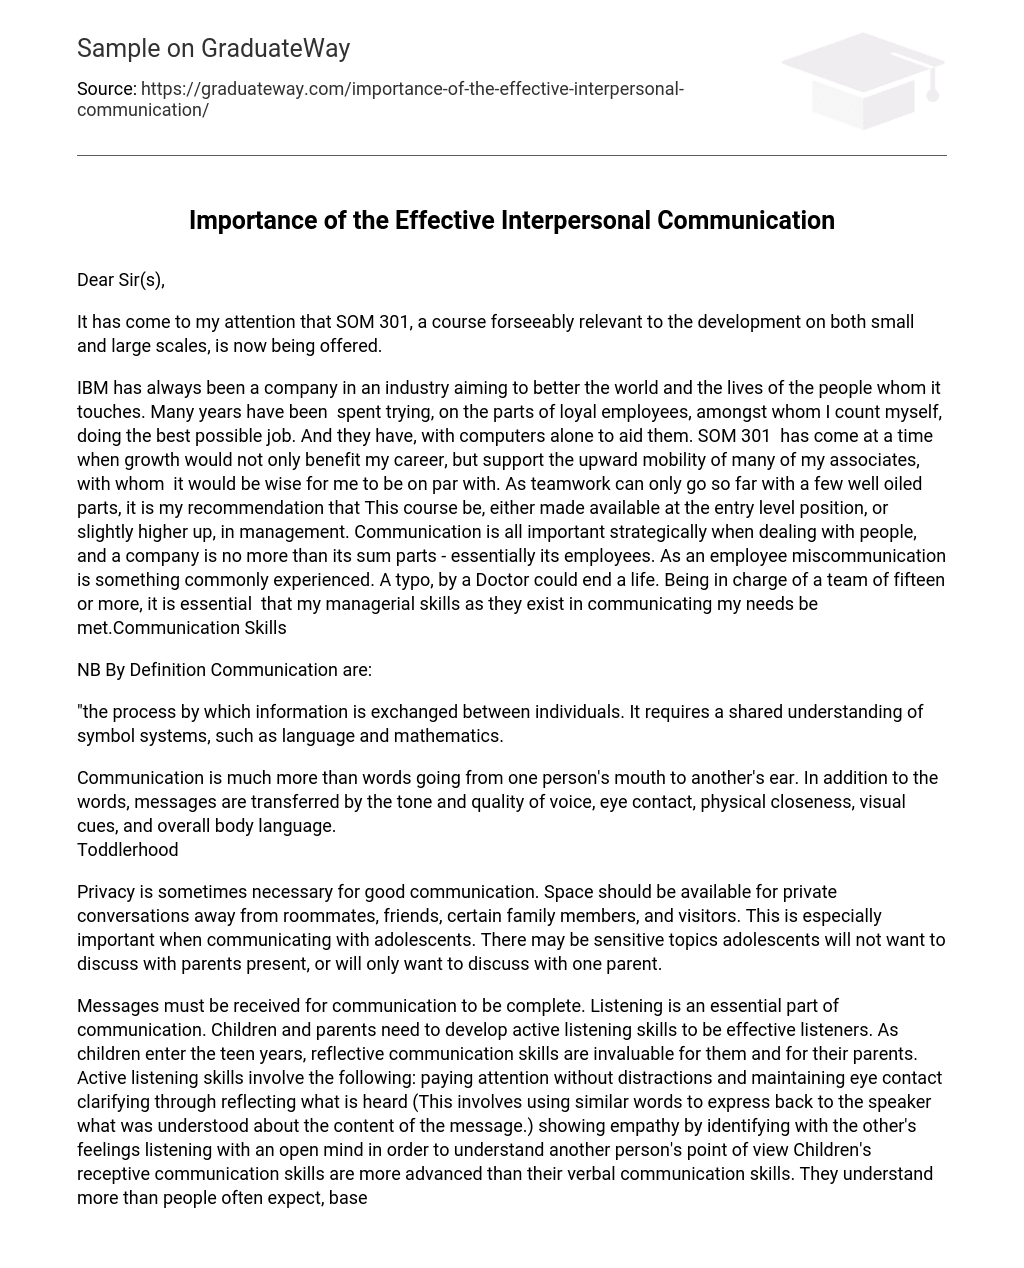 Importance of the Effective Interpersonal Communication